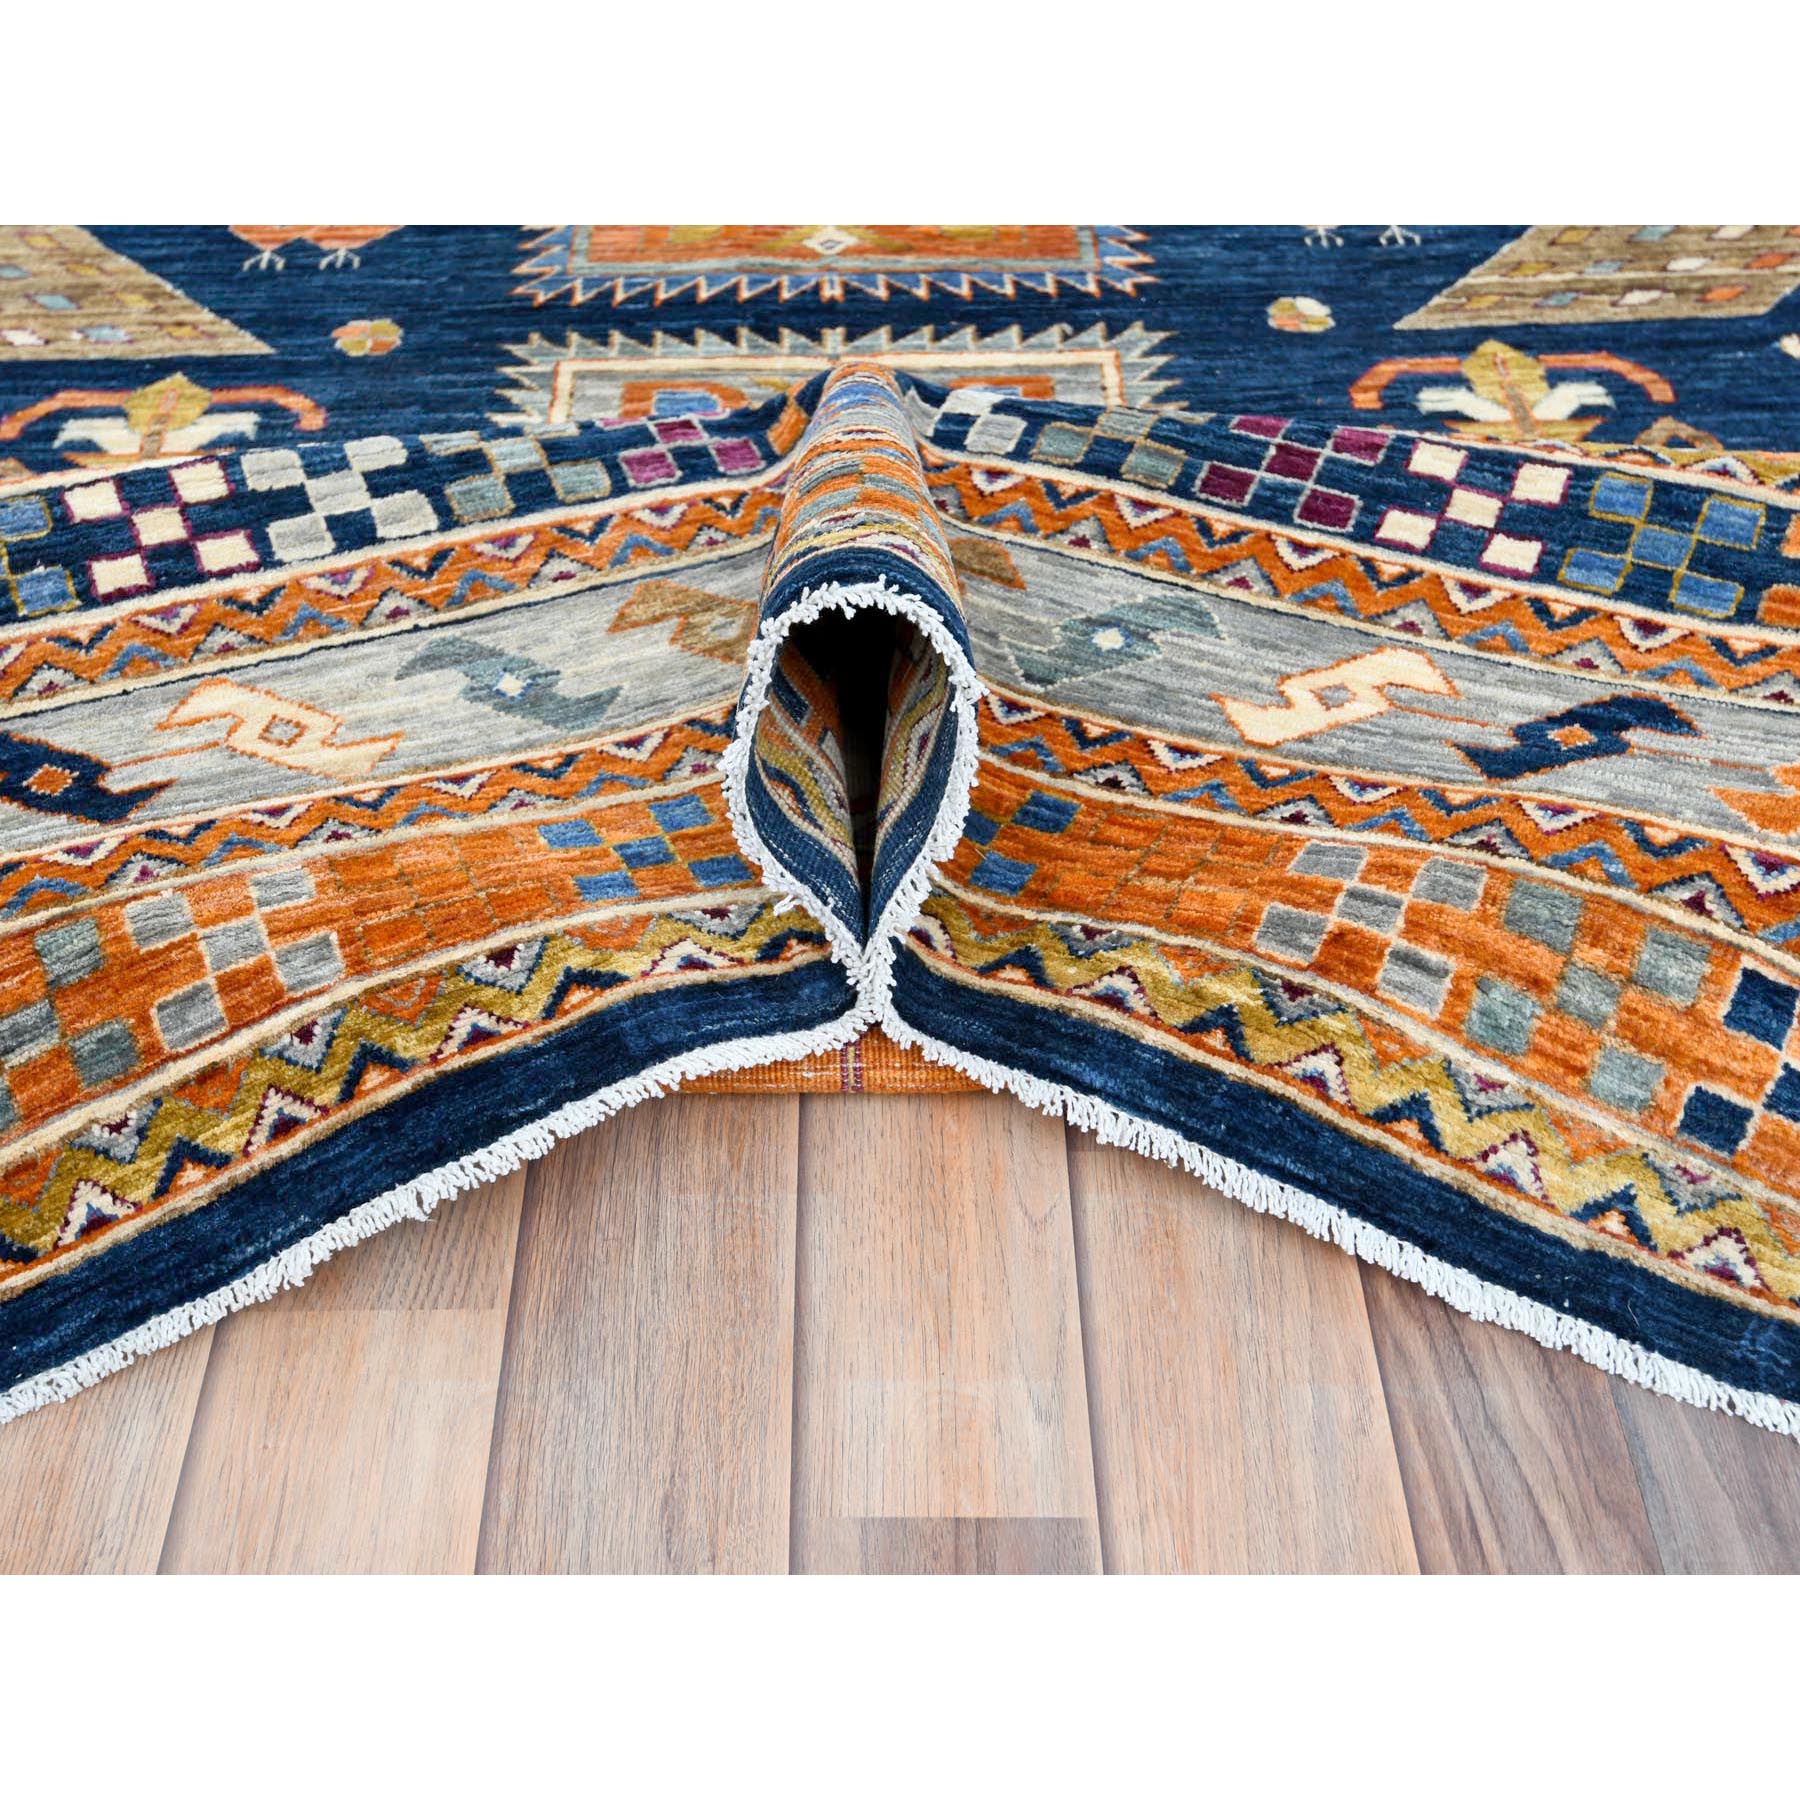 9'1"x11'7" Navy Blue, Armenian Inspired Caucasian Design with Birds Figurines 200 KPSI, Vegetable Dyes Dense Weave, Pure Wool Hand Woven, Oriental Rug 